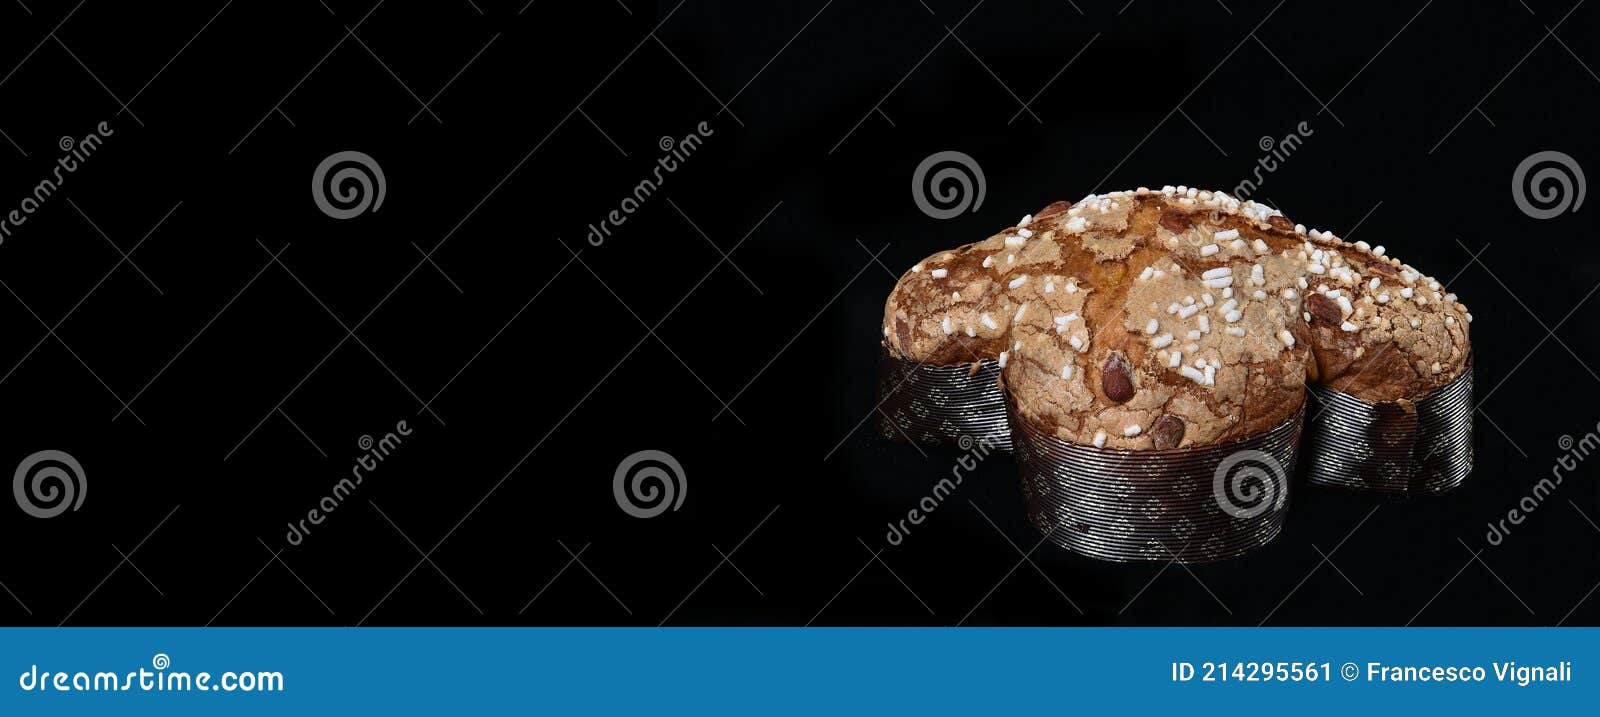 lomba pasquale or colomba di pasqua is an italian traditional easter bread whit almonds whit copyspace